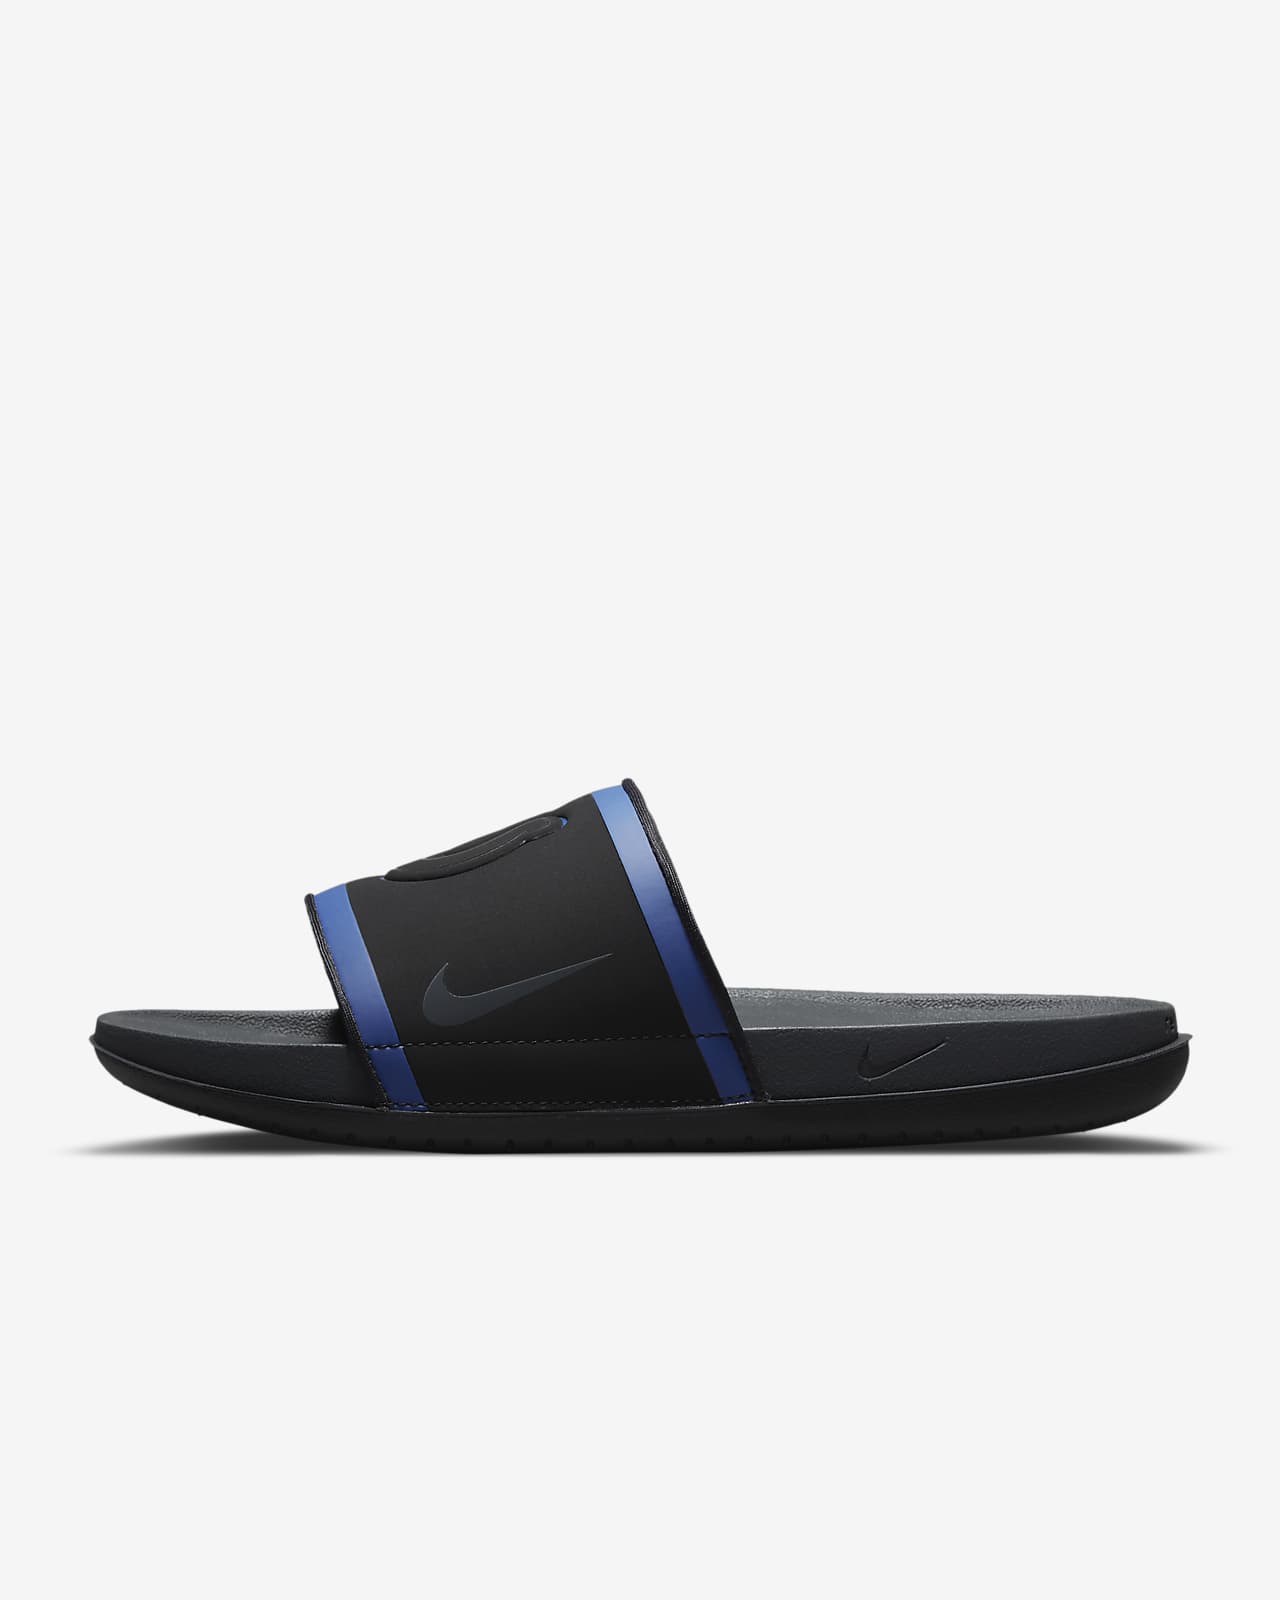 Nike Offcourt (NFL Indianapolis Colts) Slide